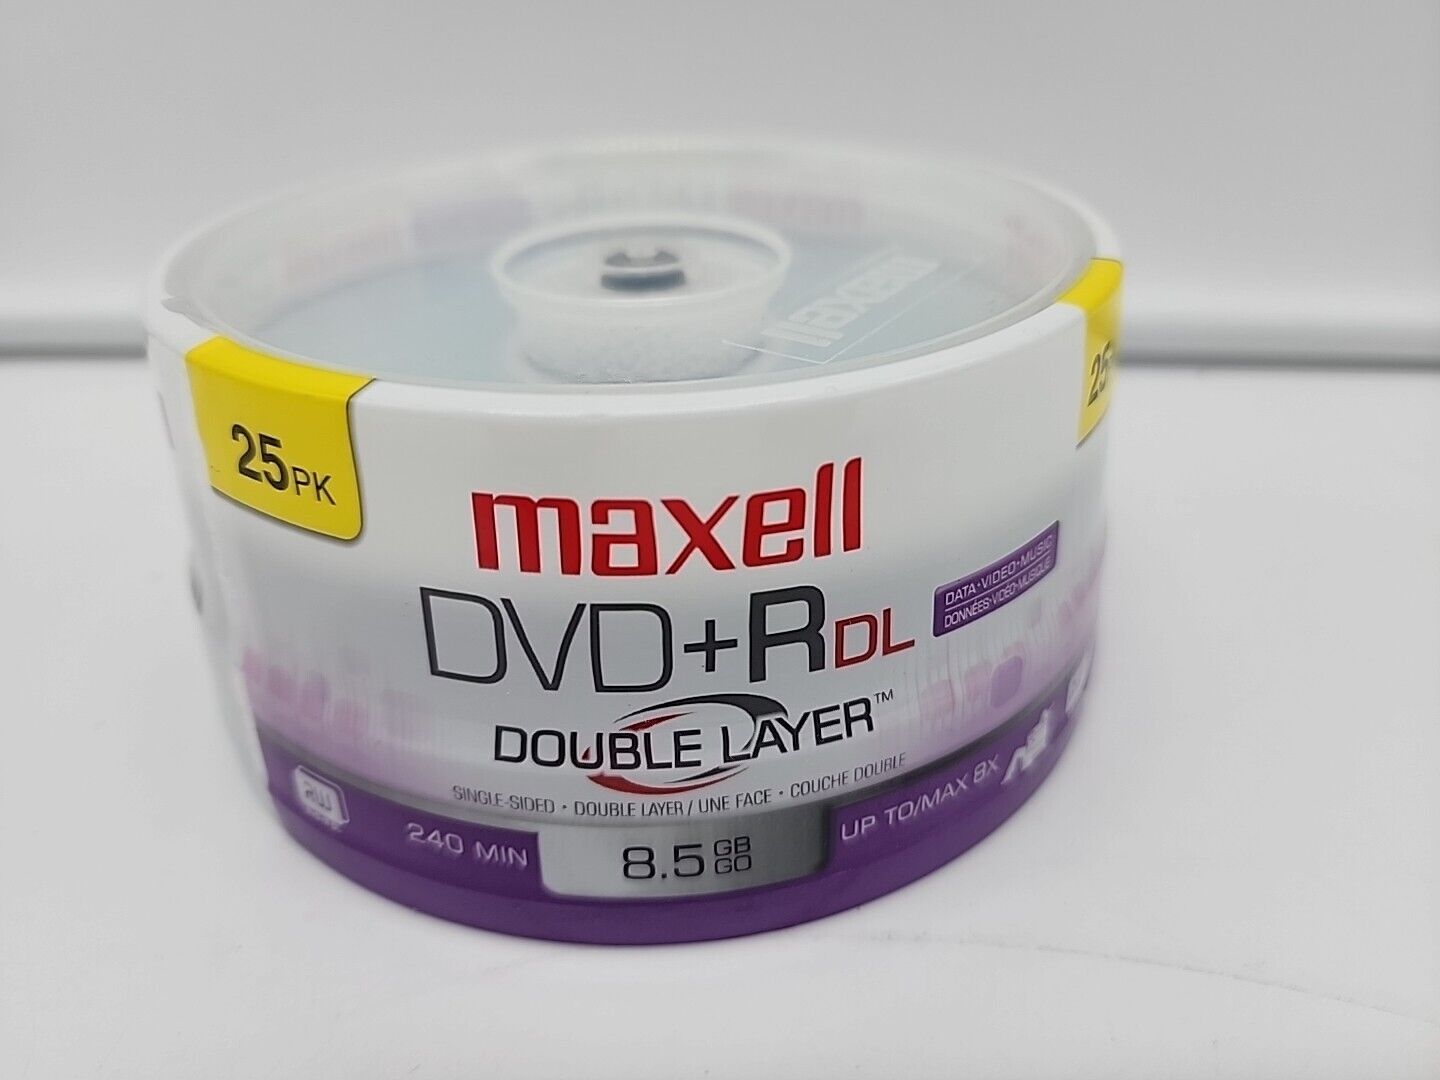 NEW 25 Pack Maxell DVD+R DOUBLE LAYER 8X Branded Discs BLANK Media 8.5GB 240 Min